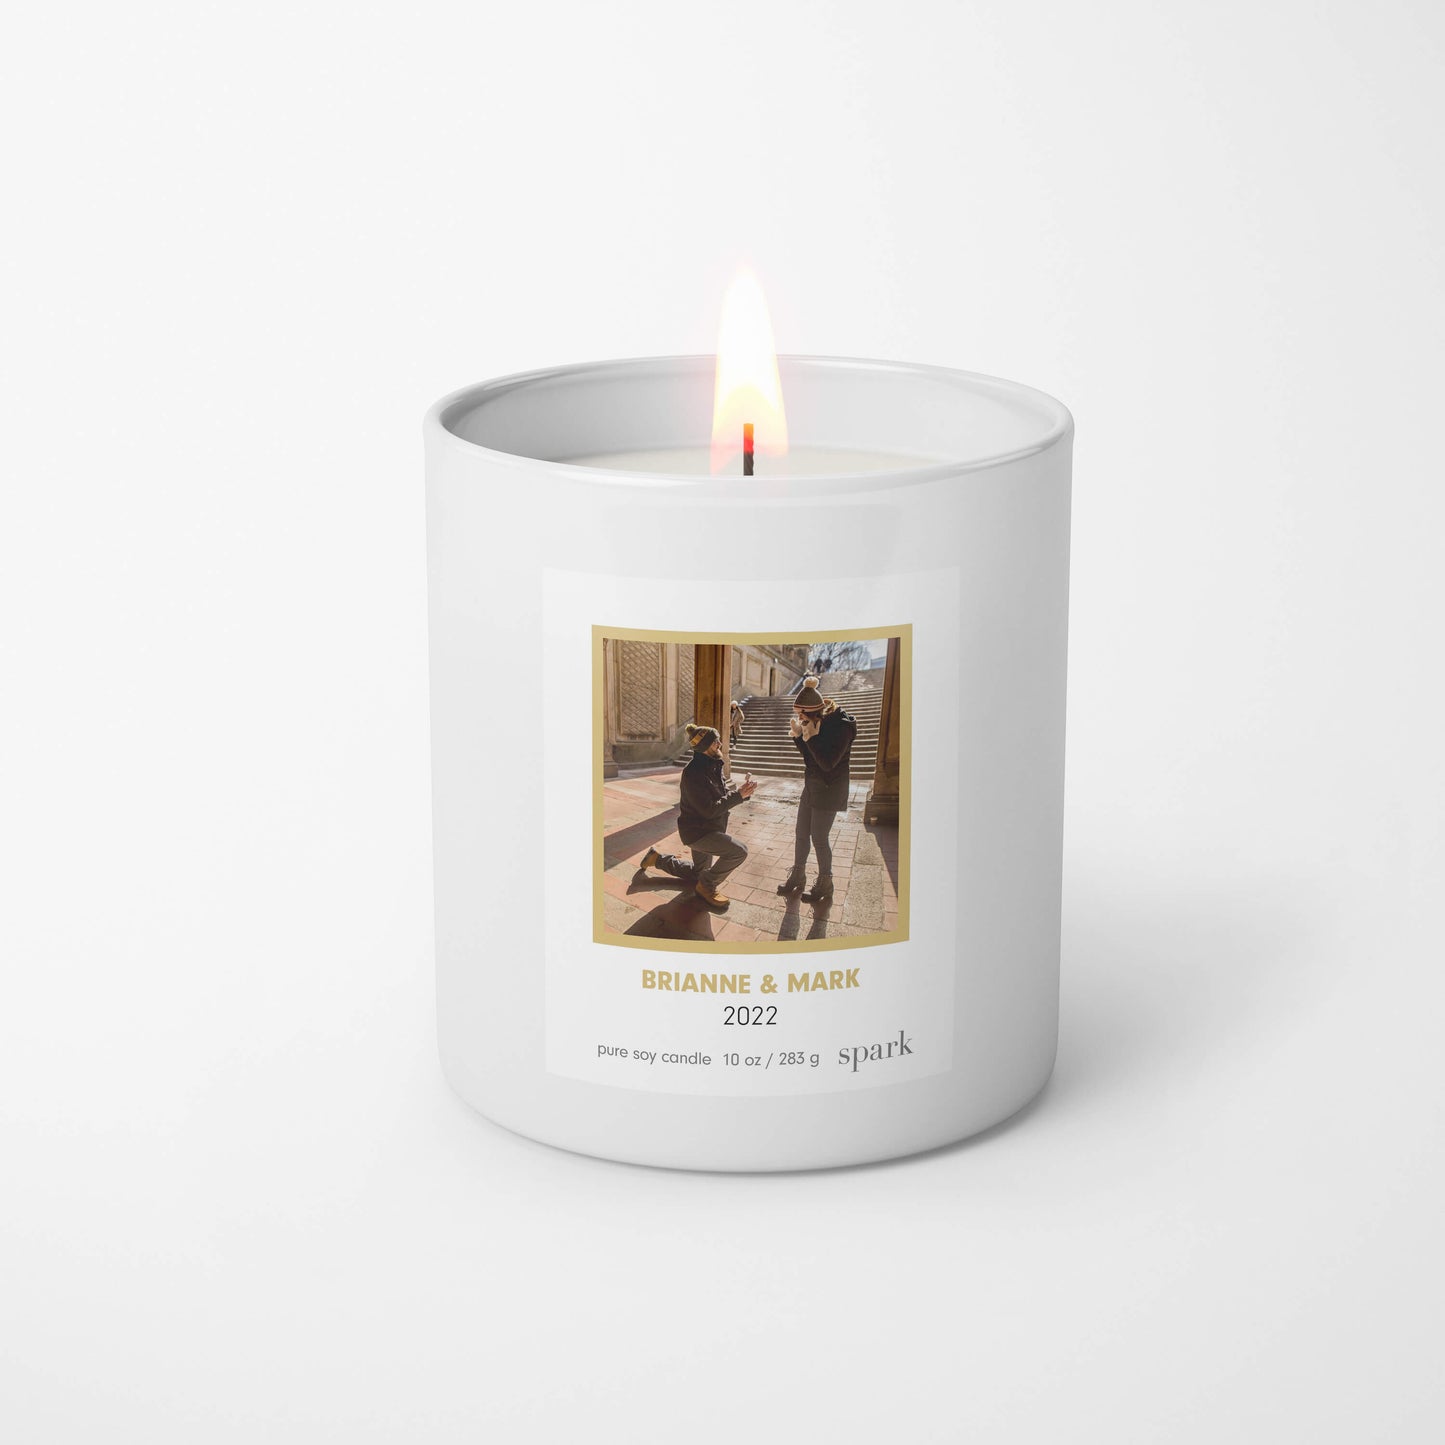 Custom Scented Photo Anniversary Candle for Weddings in 10oz Matte White Glass with Aromatherapy Scent